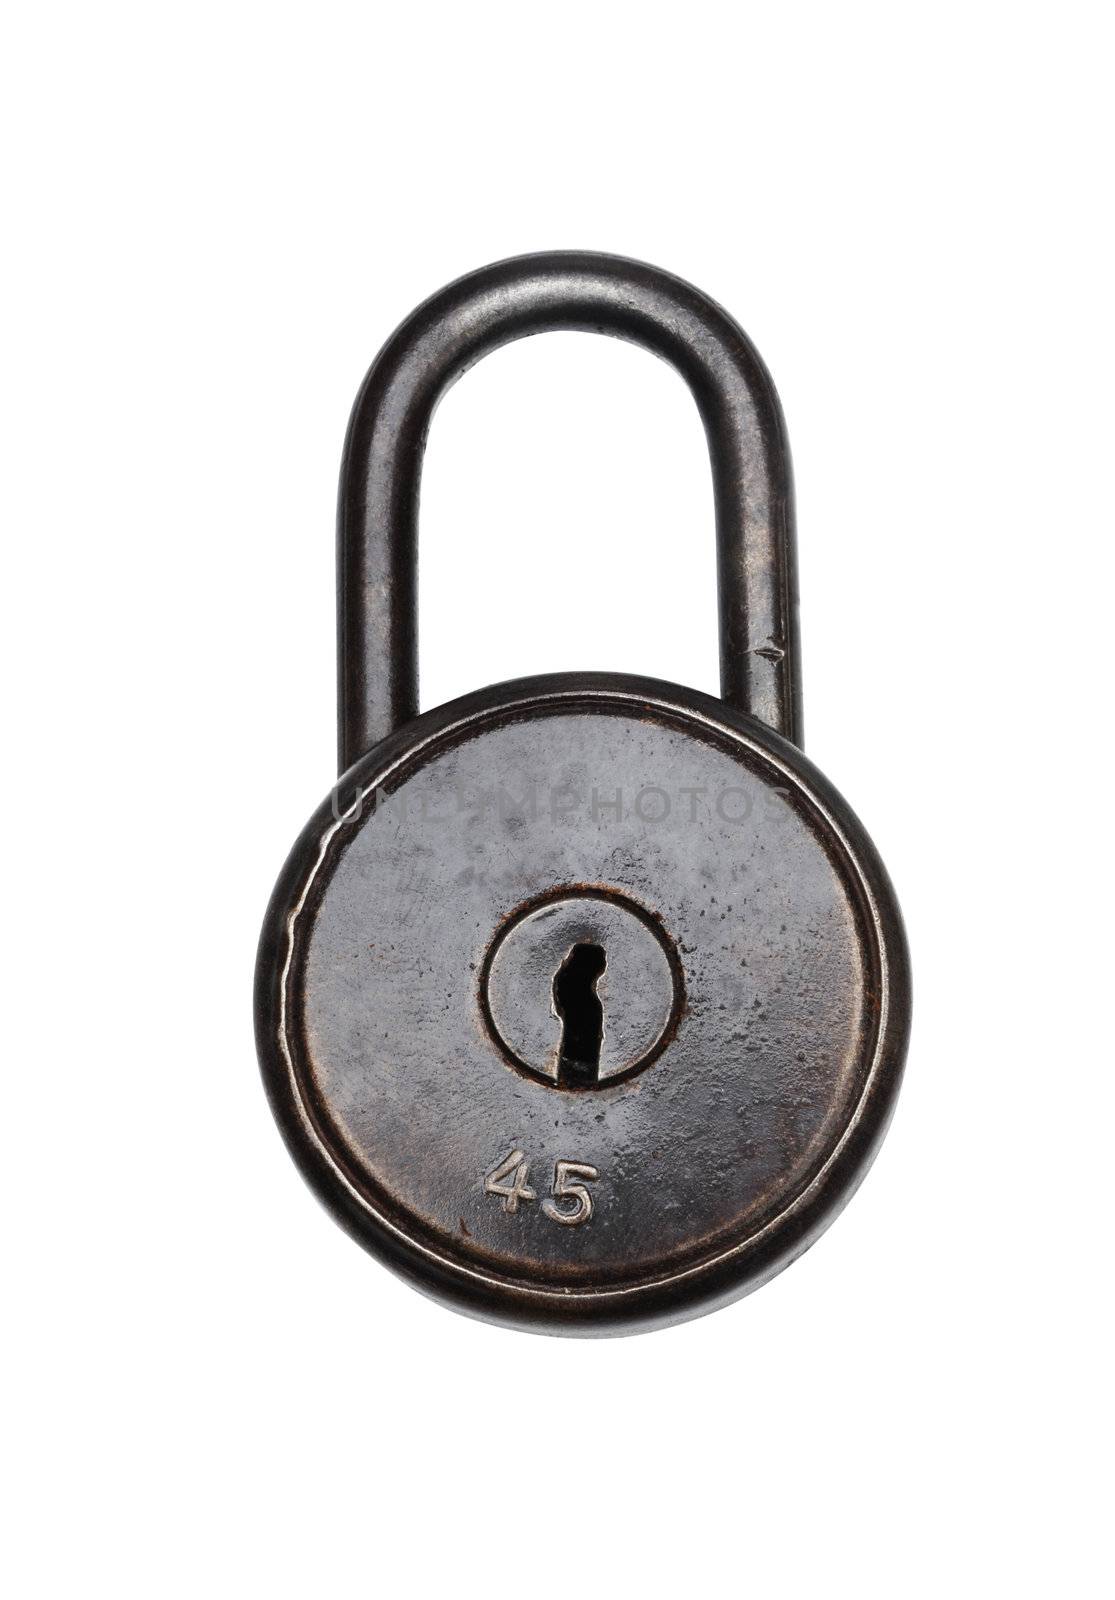 Antique Padlock  on white background. Clipping path included.